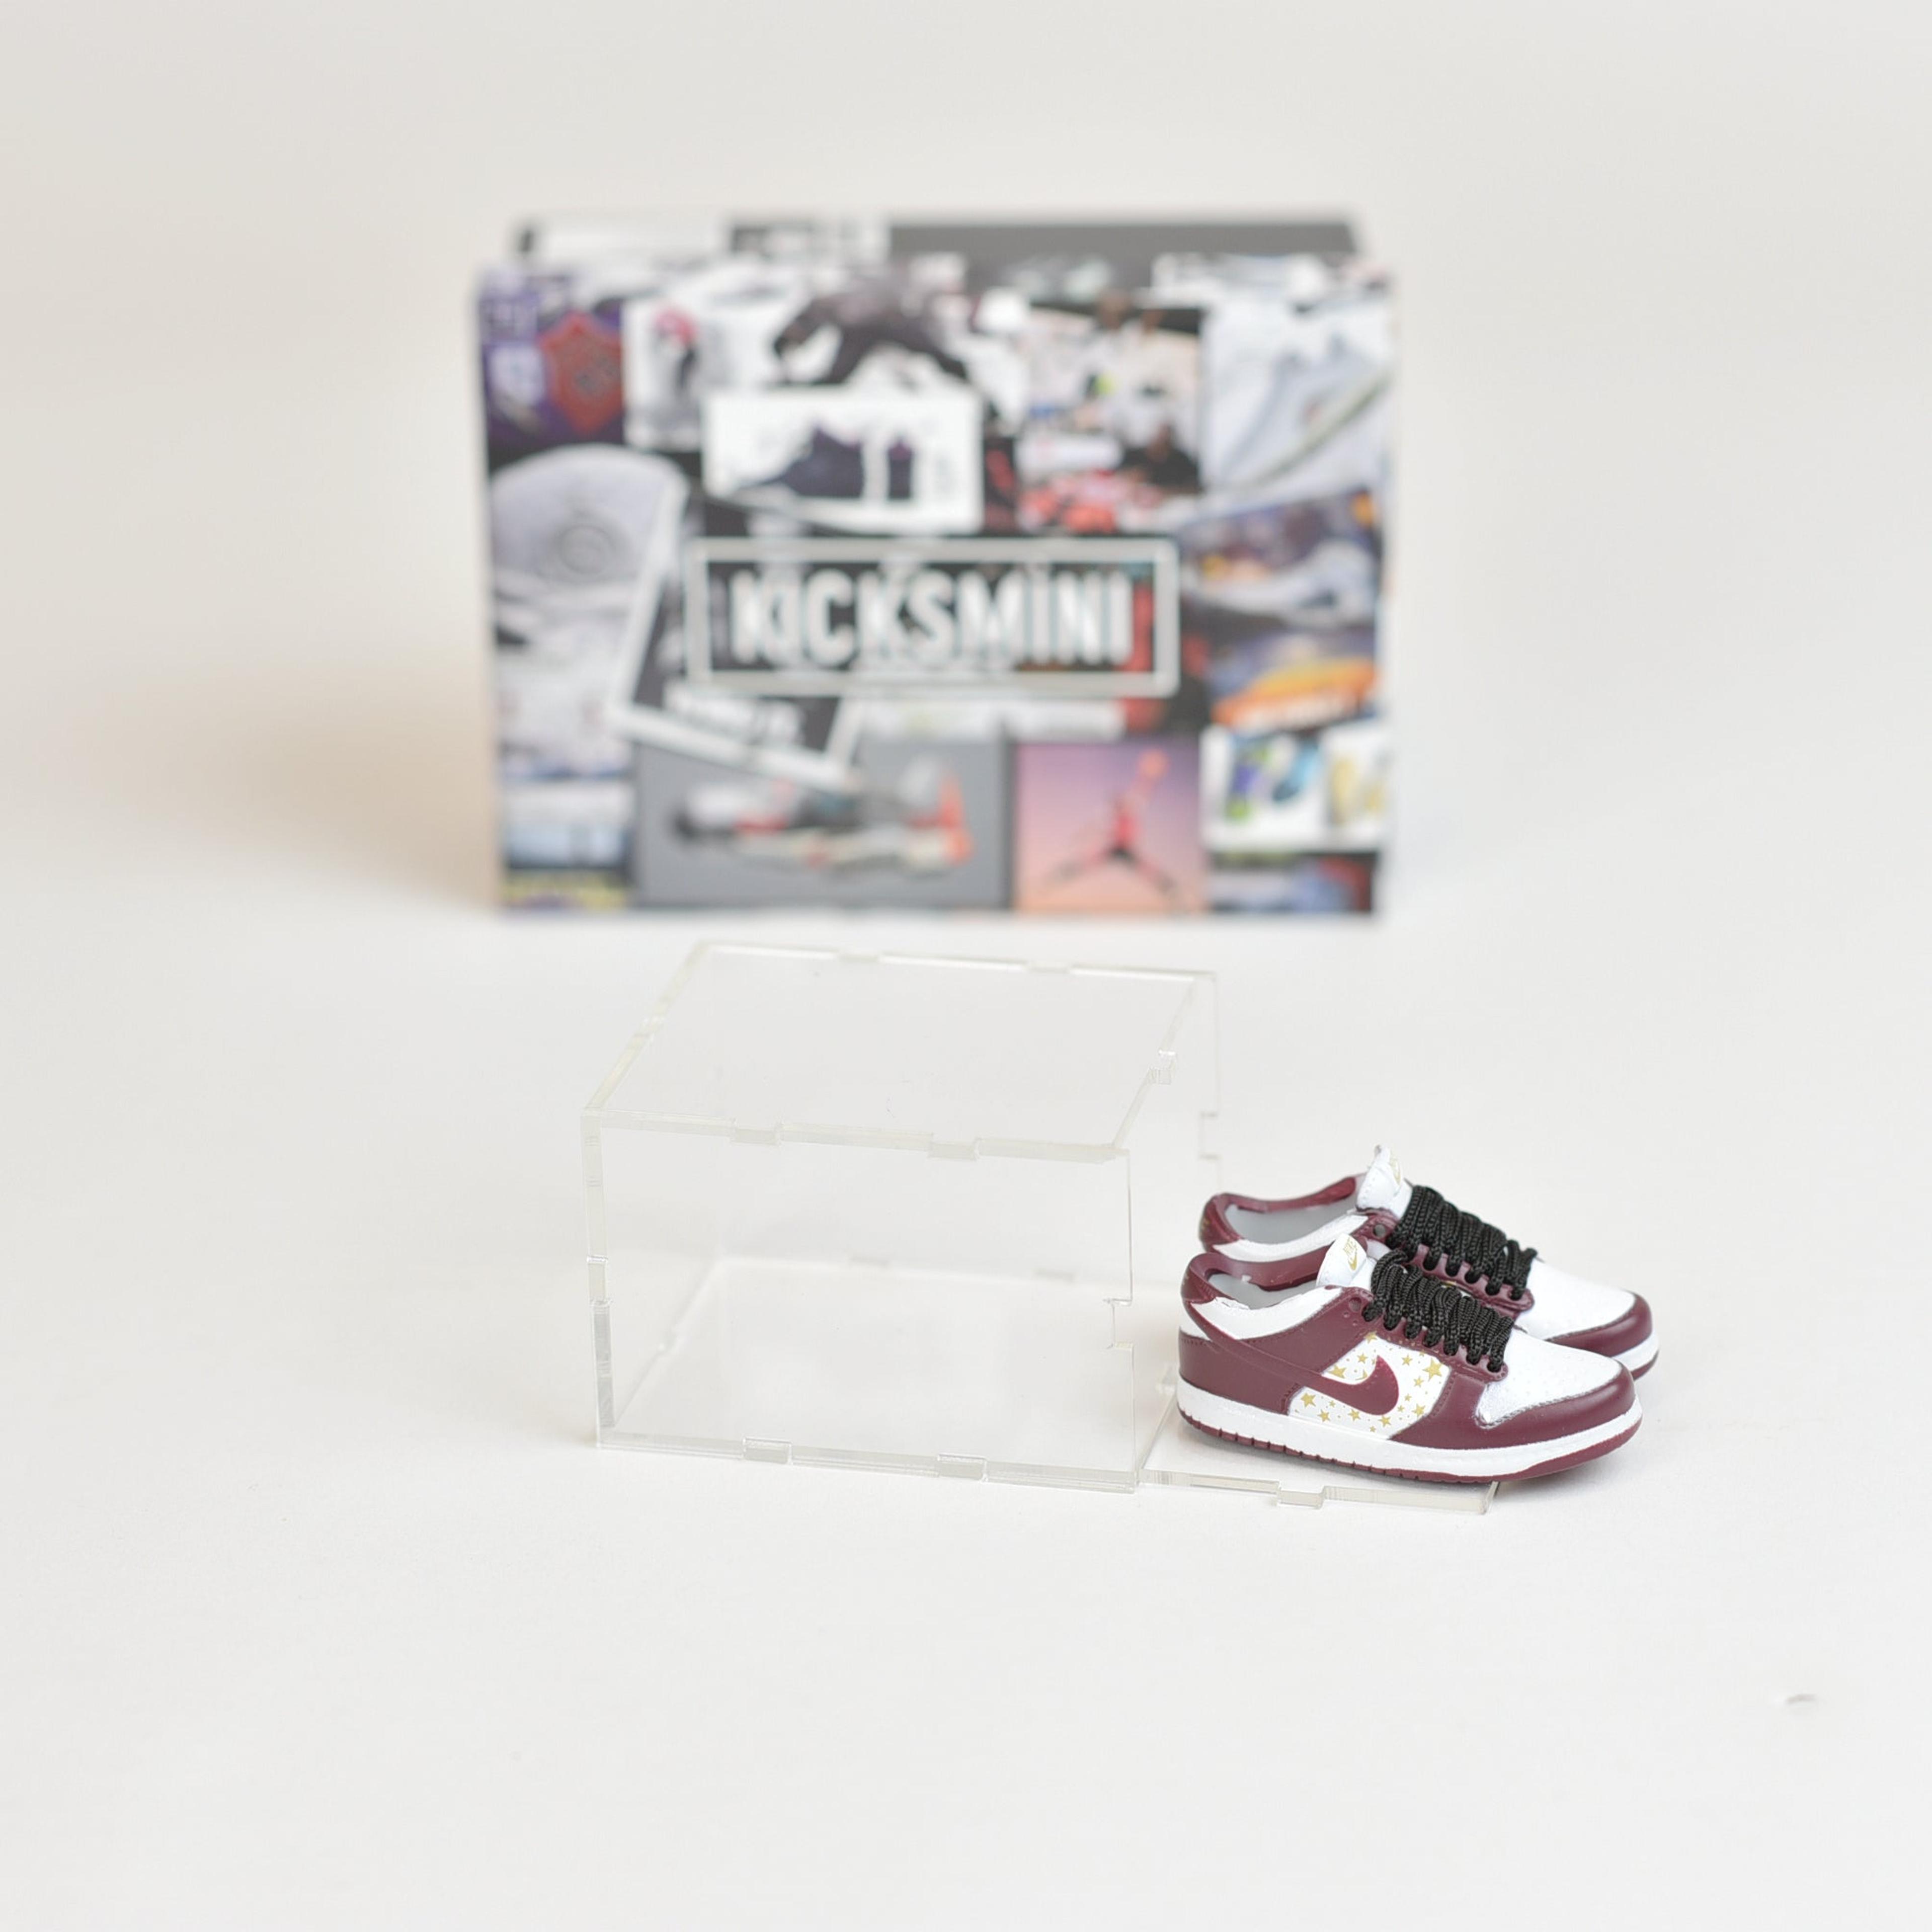 Alternate View 18 of SB Dunk Low Collaboration Mini Sneakers with Display Case